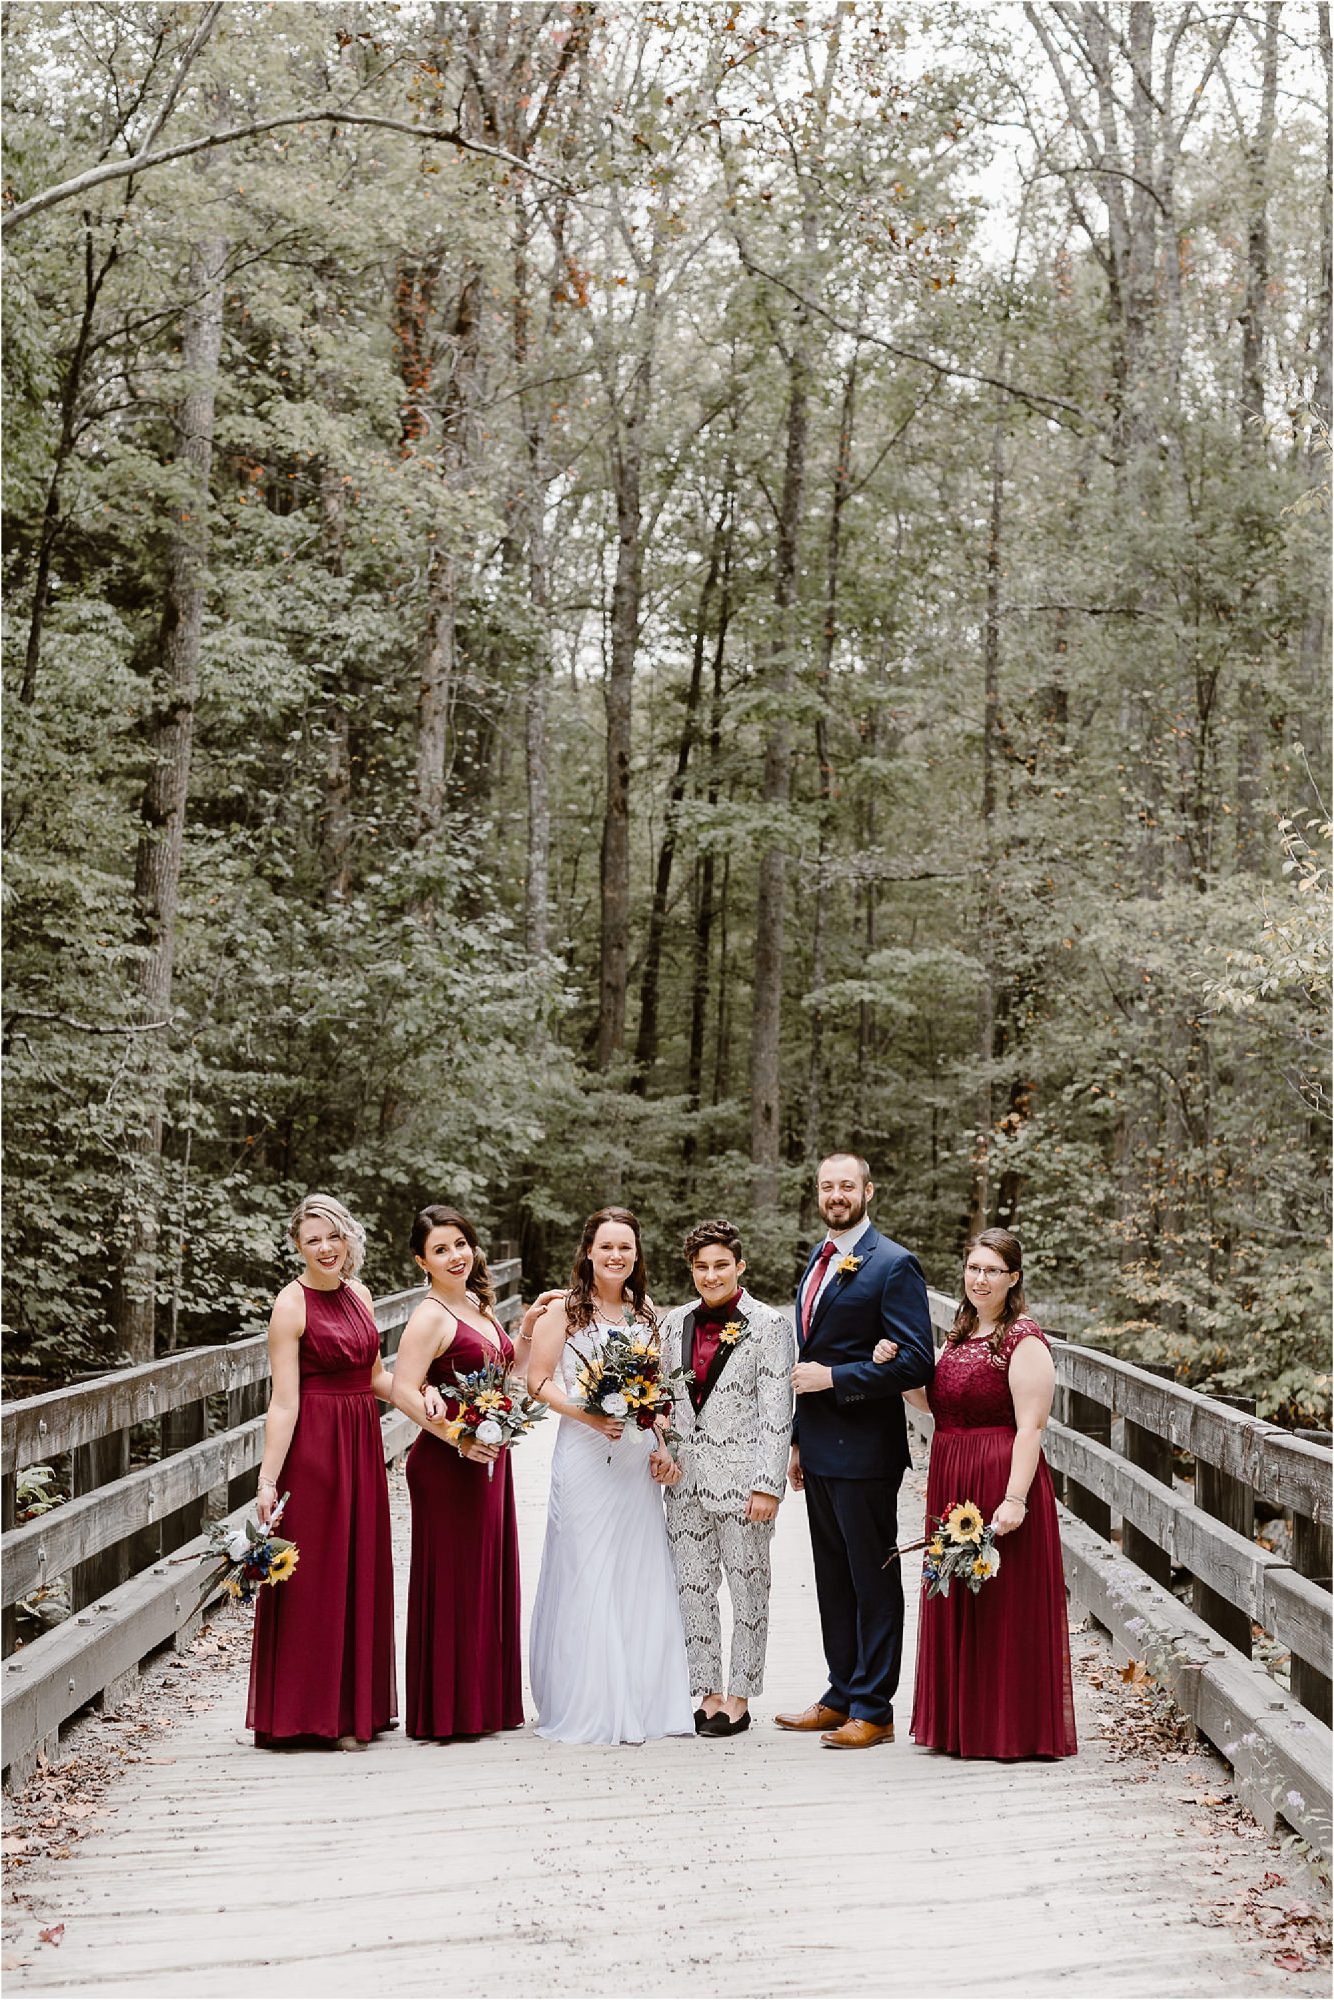 wedding party photos in the forest at Greenbrier